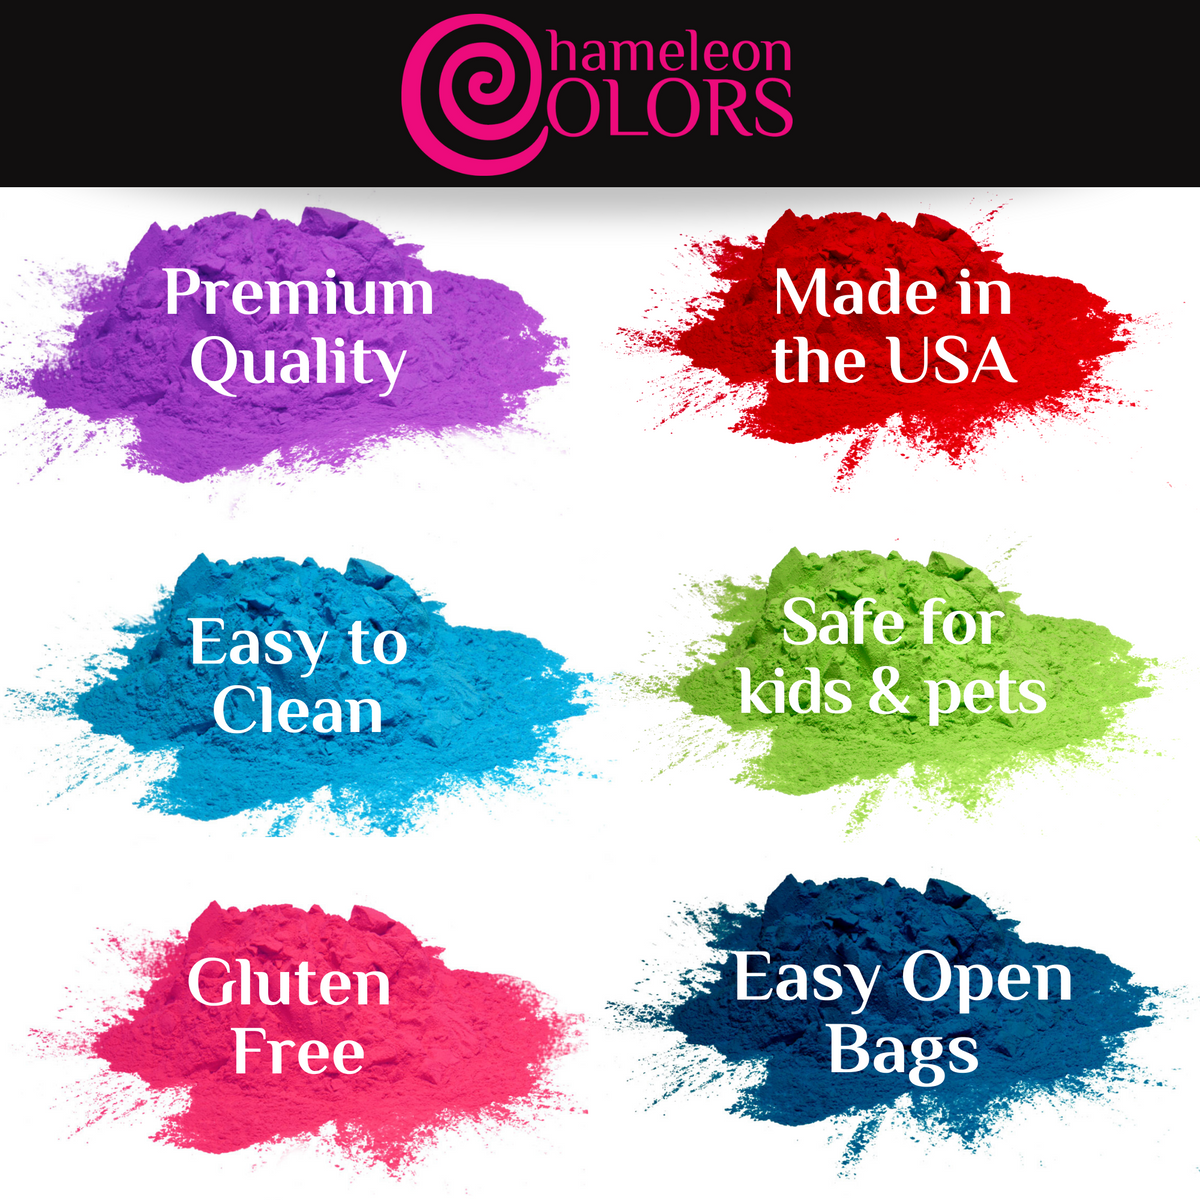 Chameleon Colors 25 lb. Color Powder - 1 Pack - Vibrant Red Color - For  15-20 People - Kid Friendly, Non-Toxic & Gluten-Free - Great for Holi,  Color